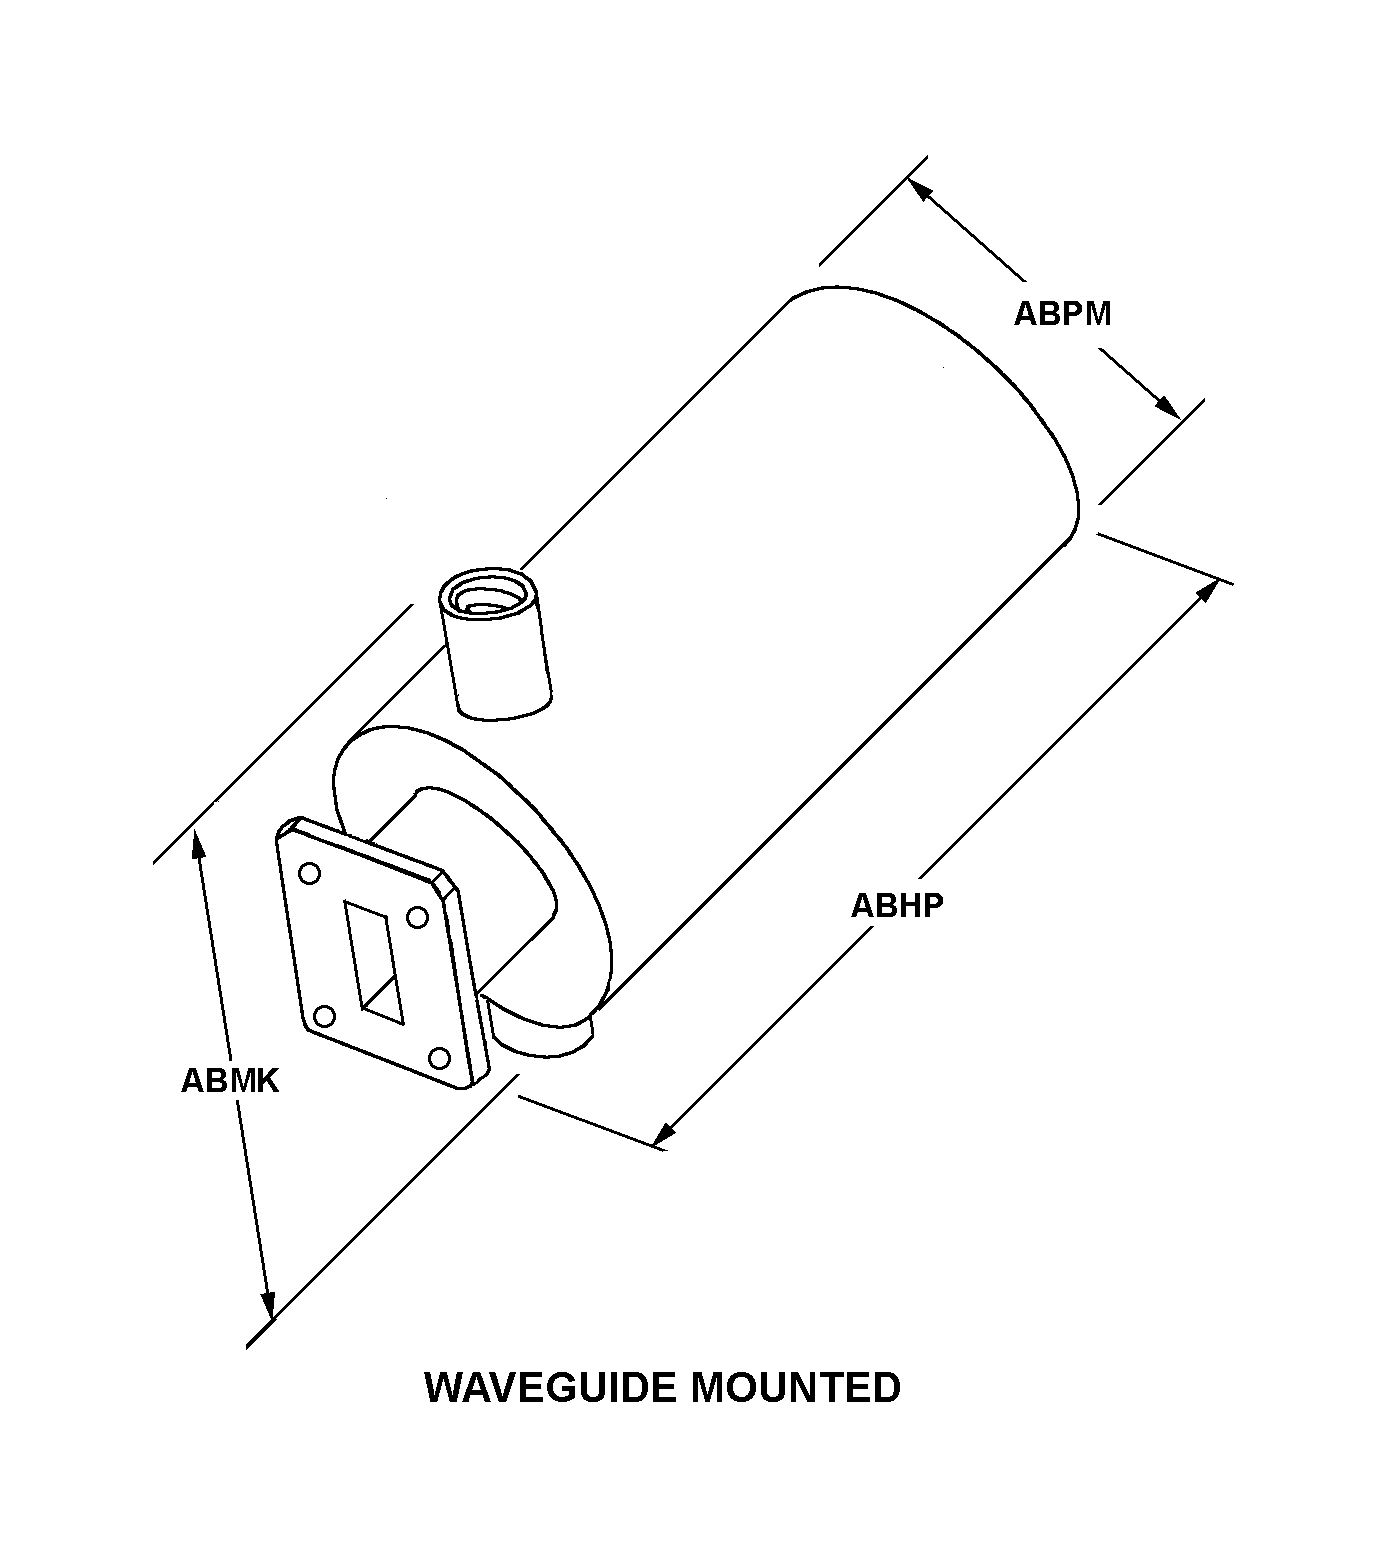 WAVEGUIDE MOUNTED style nsn 5985-00-952-1025